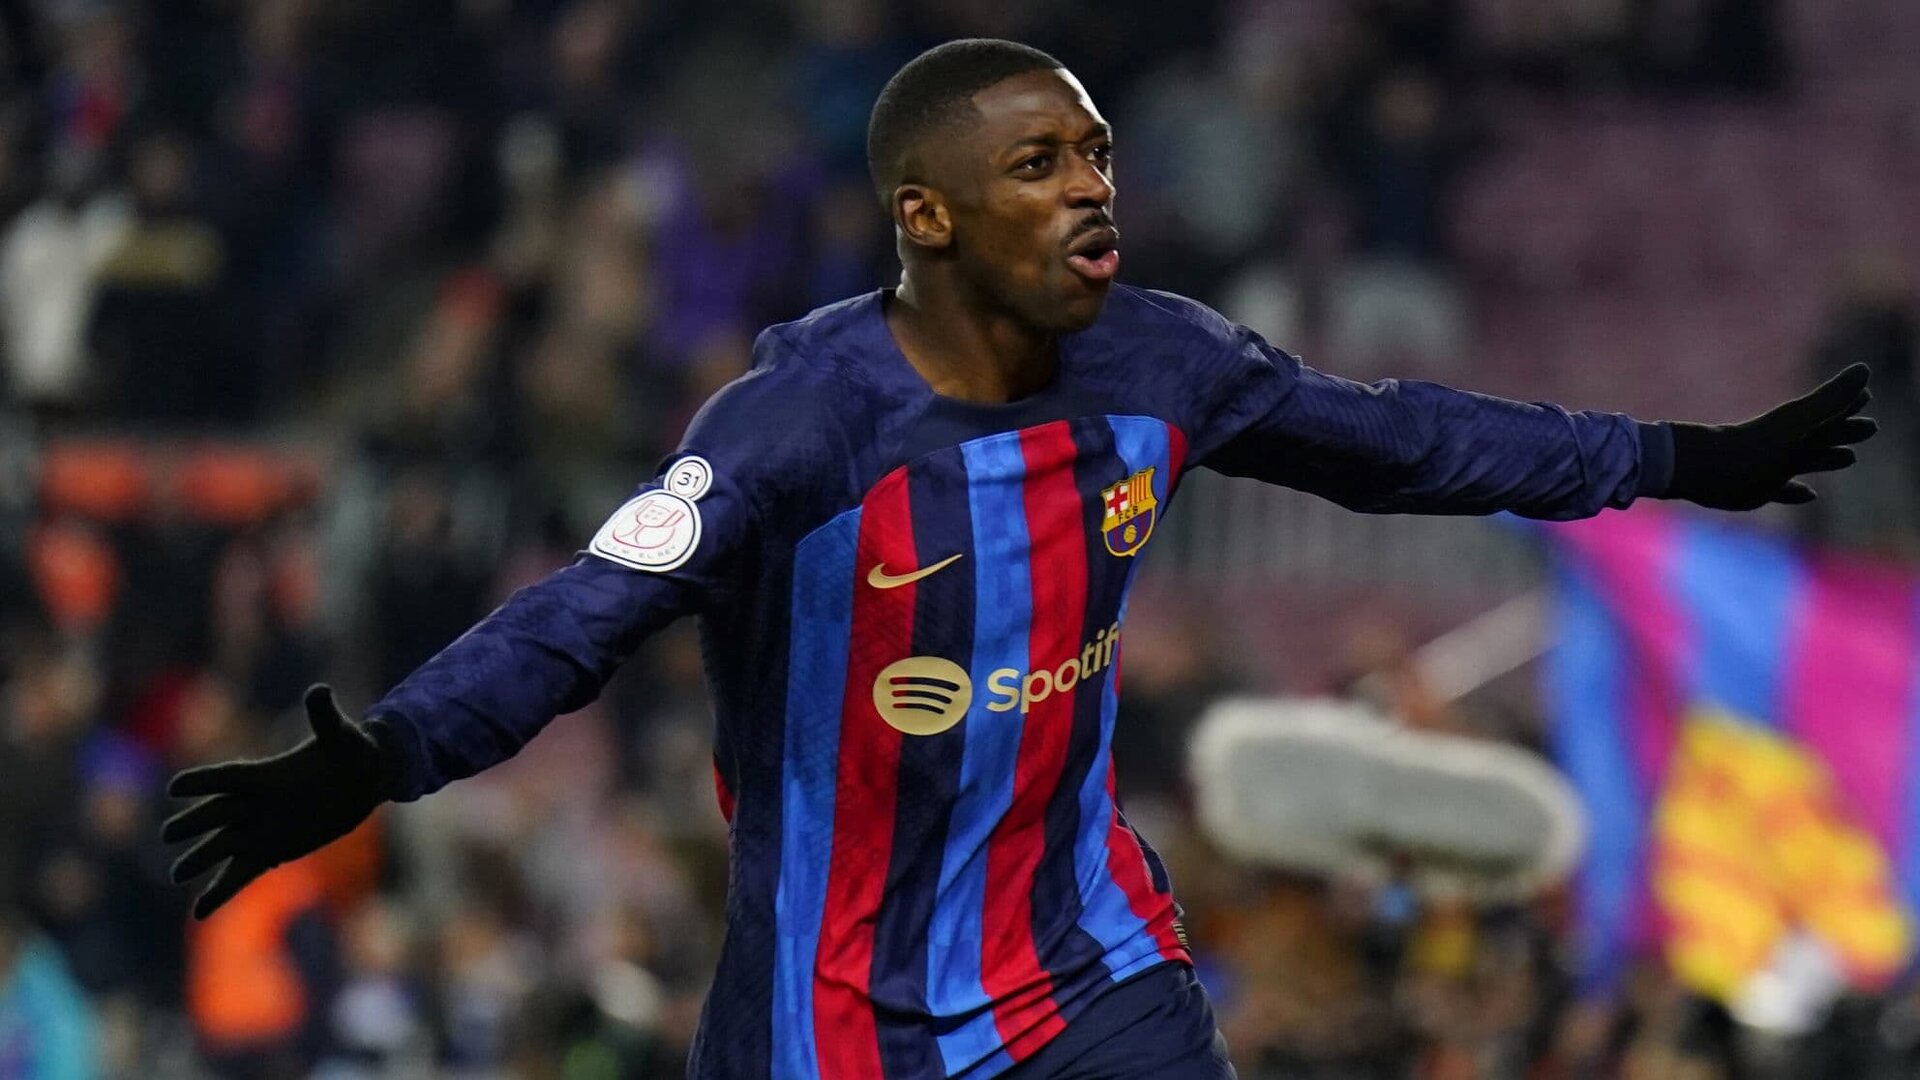 Ousmane Dembele will receive 50% of his €50m transfer fee ahead of PSG  switch